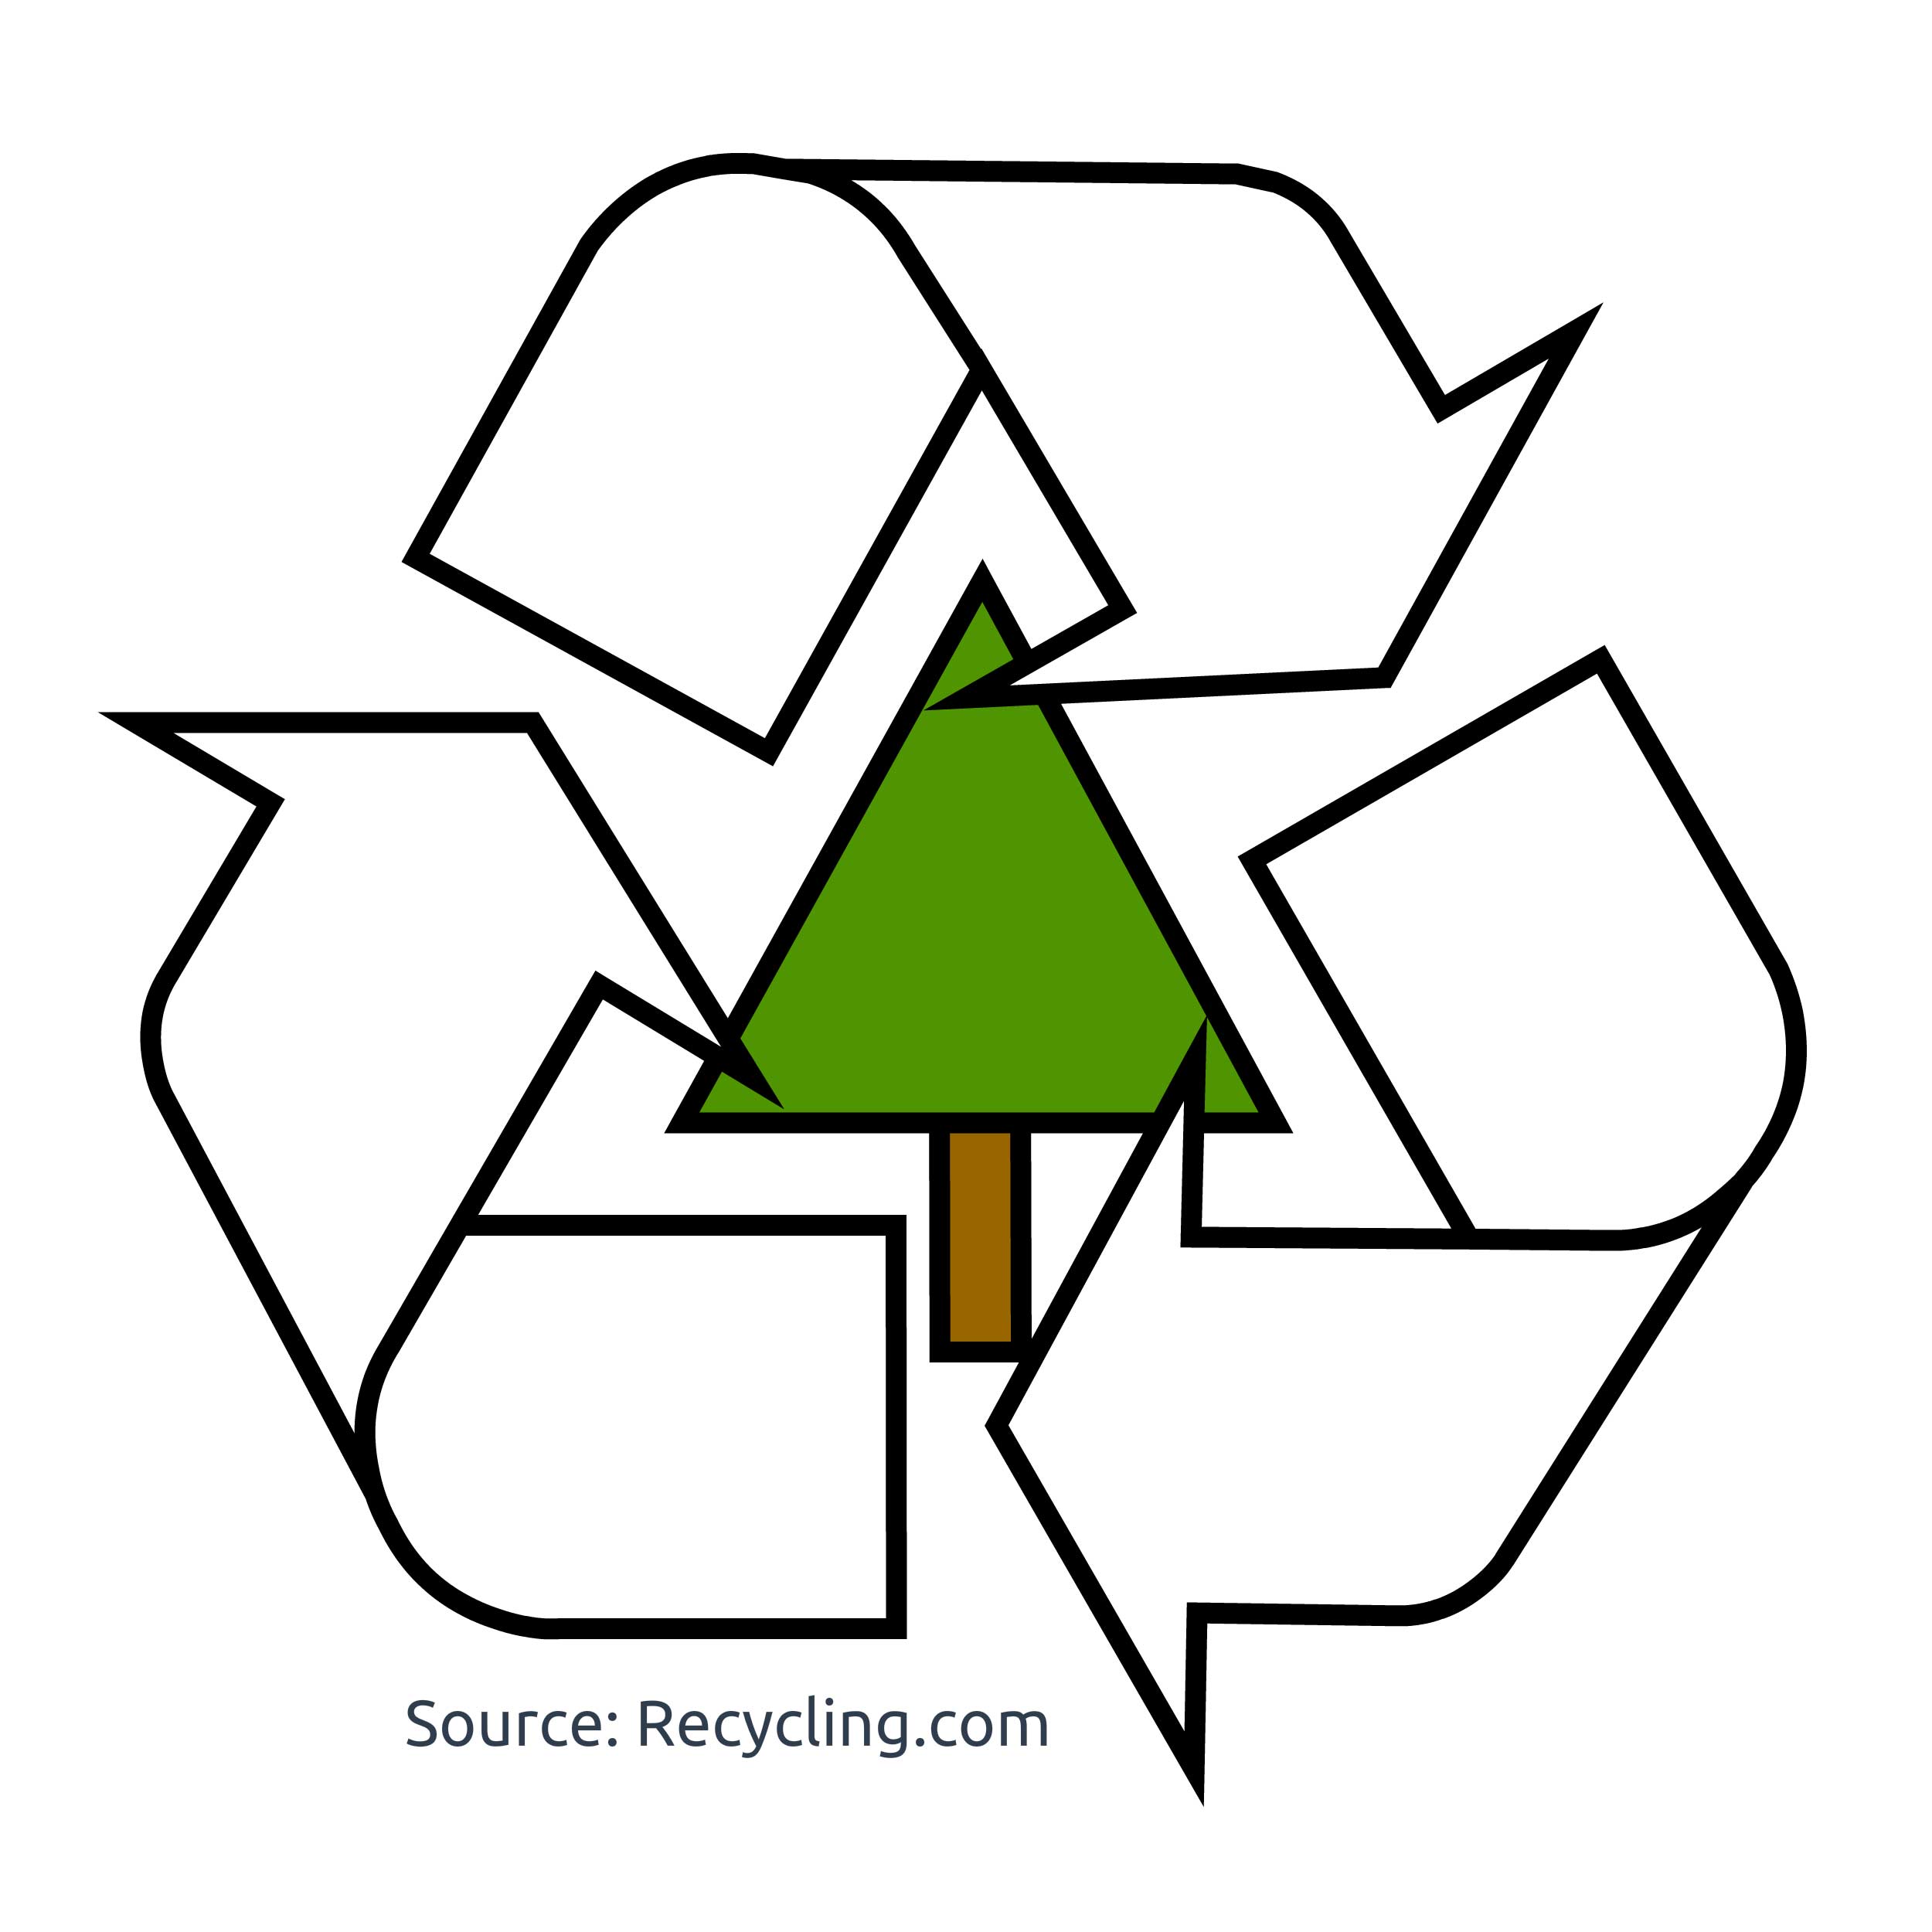 White Recycle Logo - Recycling Symbol the Original Recycle Logo